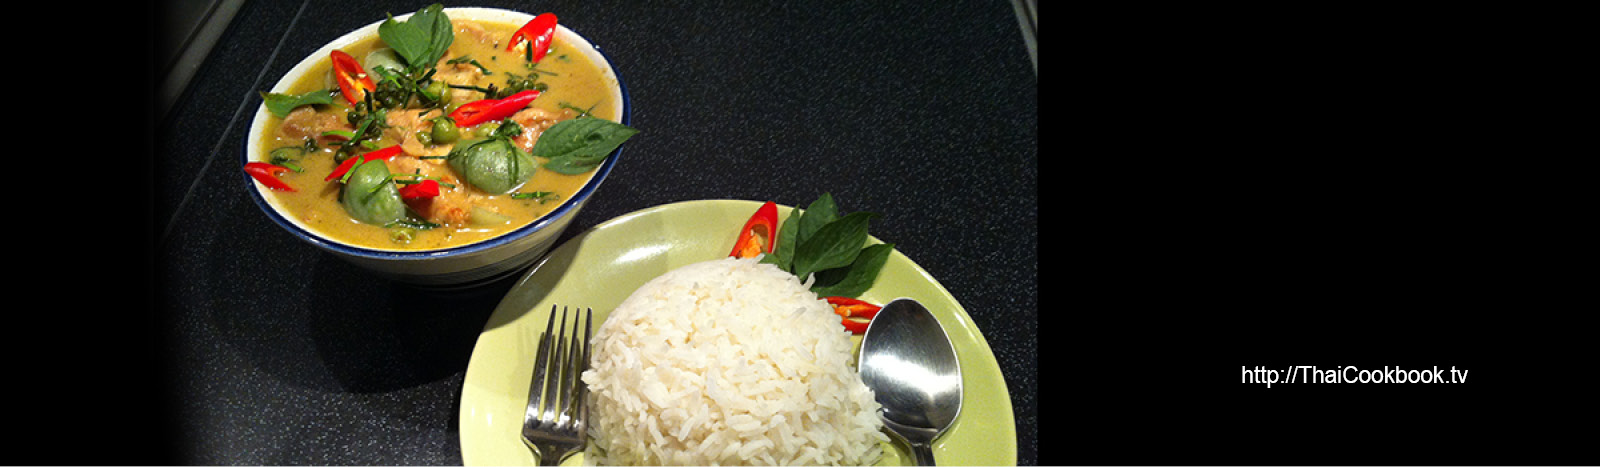 Authentic Thai recipe for Sweet Green Curry with Chicken